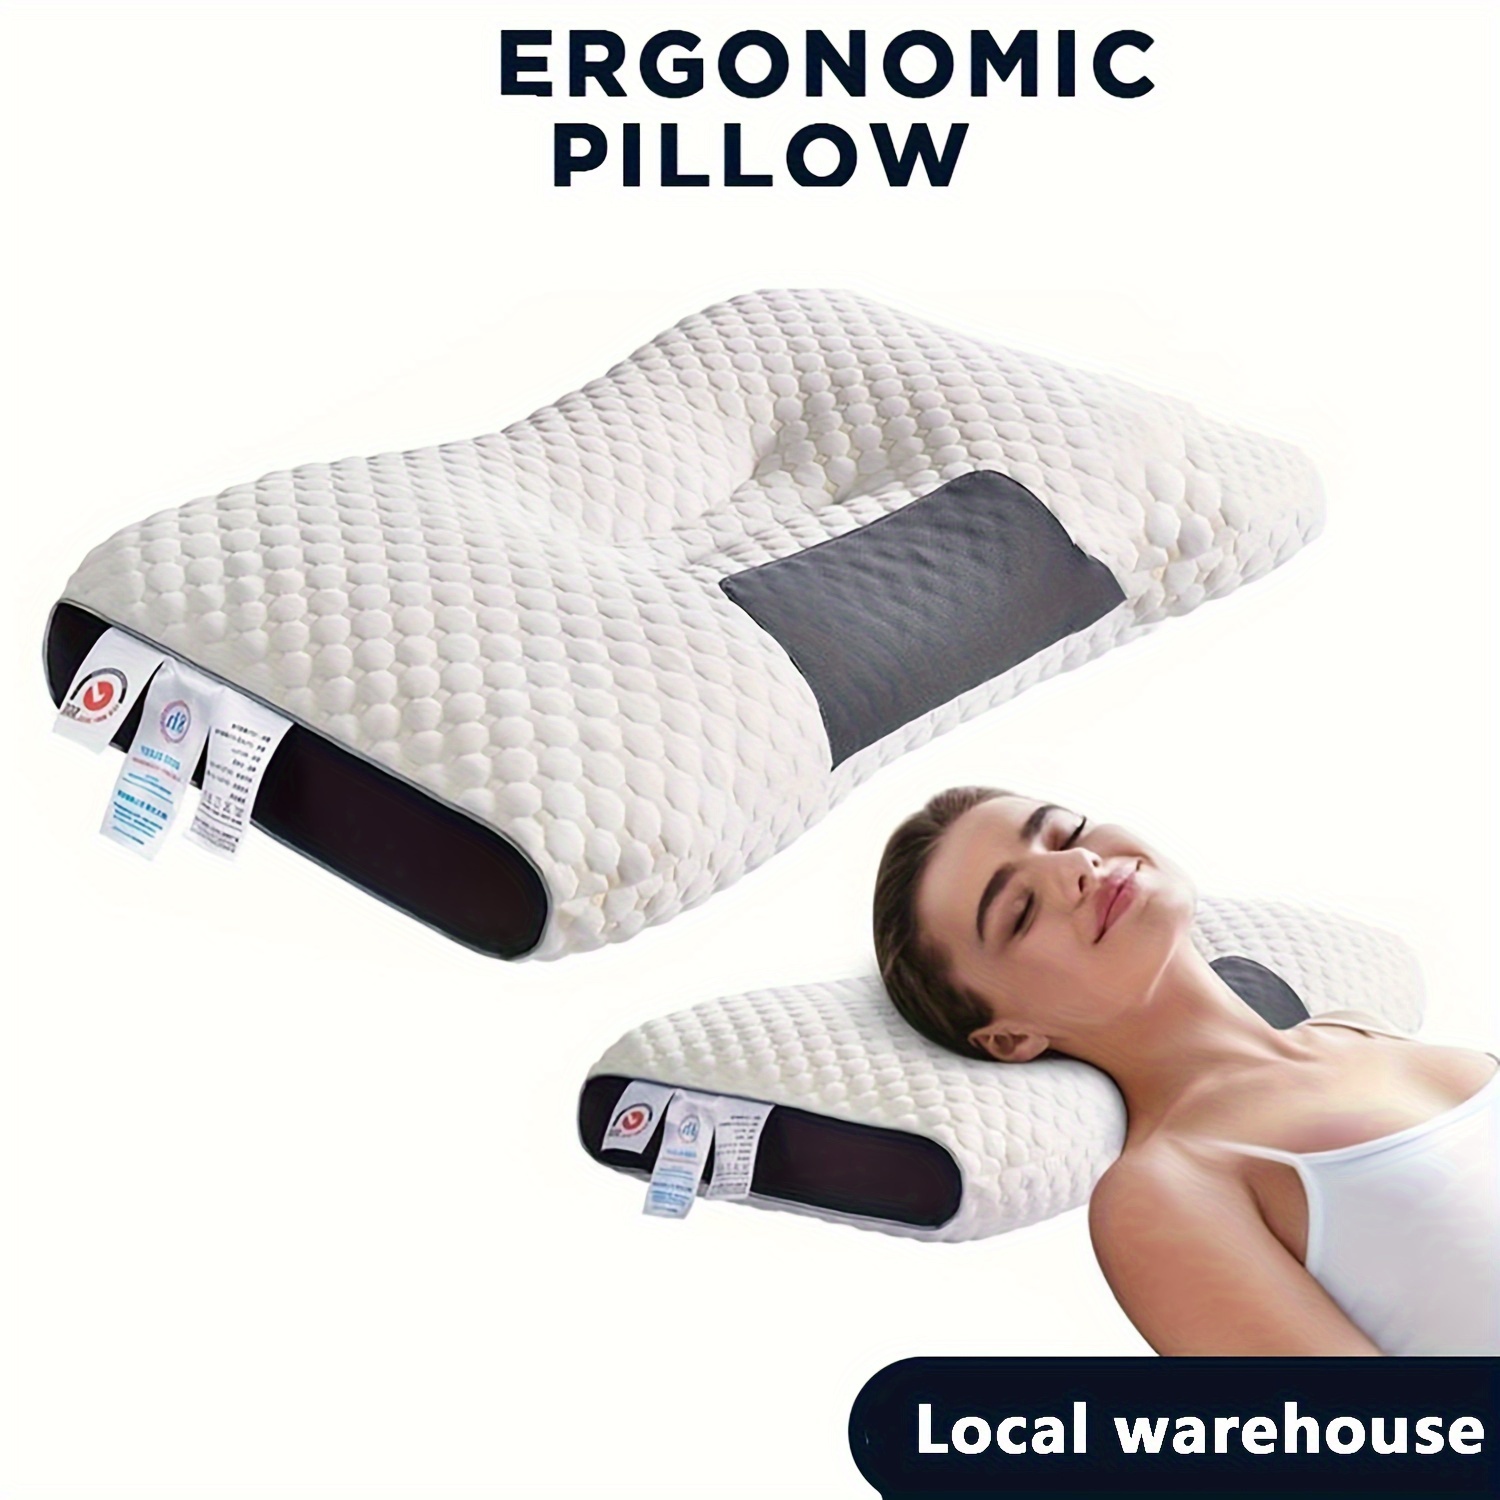 

1 Pcs 3 D Ergonomic Pillow Viral Microfiber Traction Neck Support Soft Piping Washable Premium Pillows